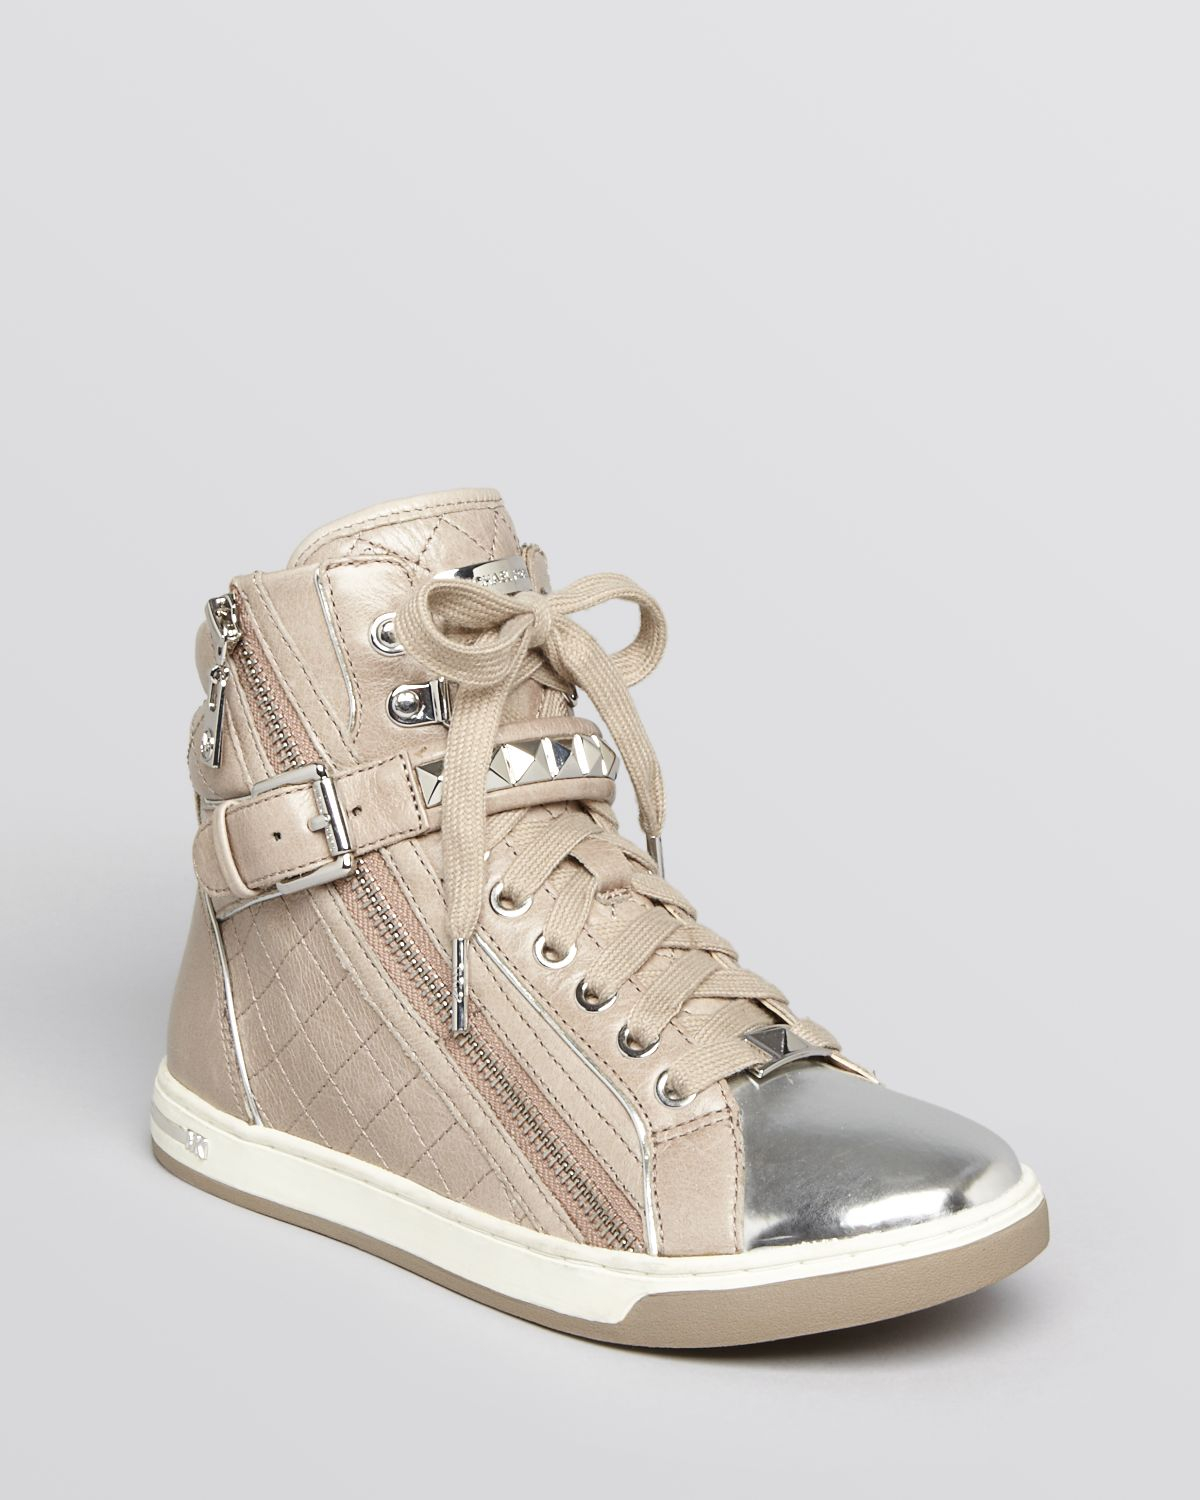 Lyst - Michael Michael Kors Lace Up High Top Sneakers Glam Studded in Gray